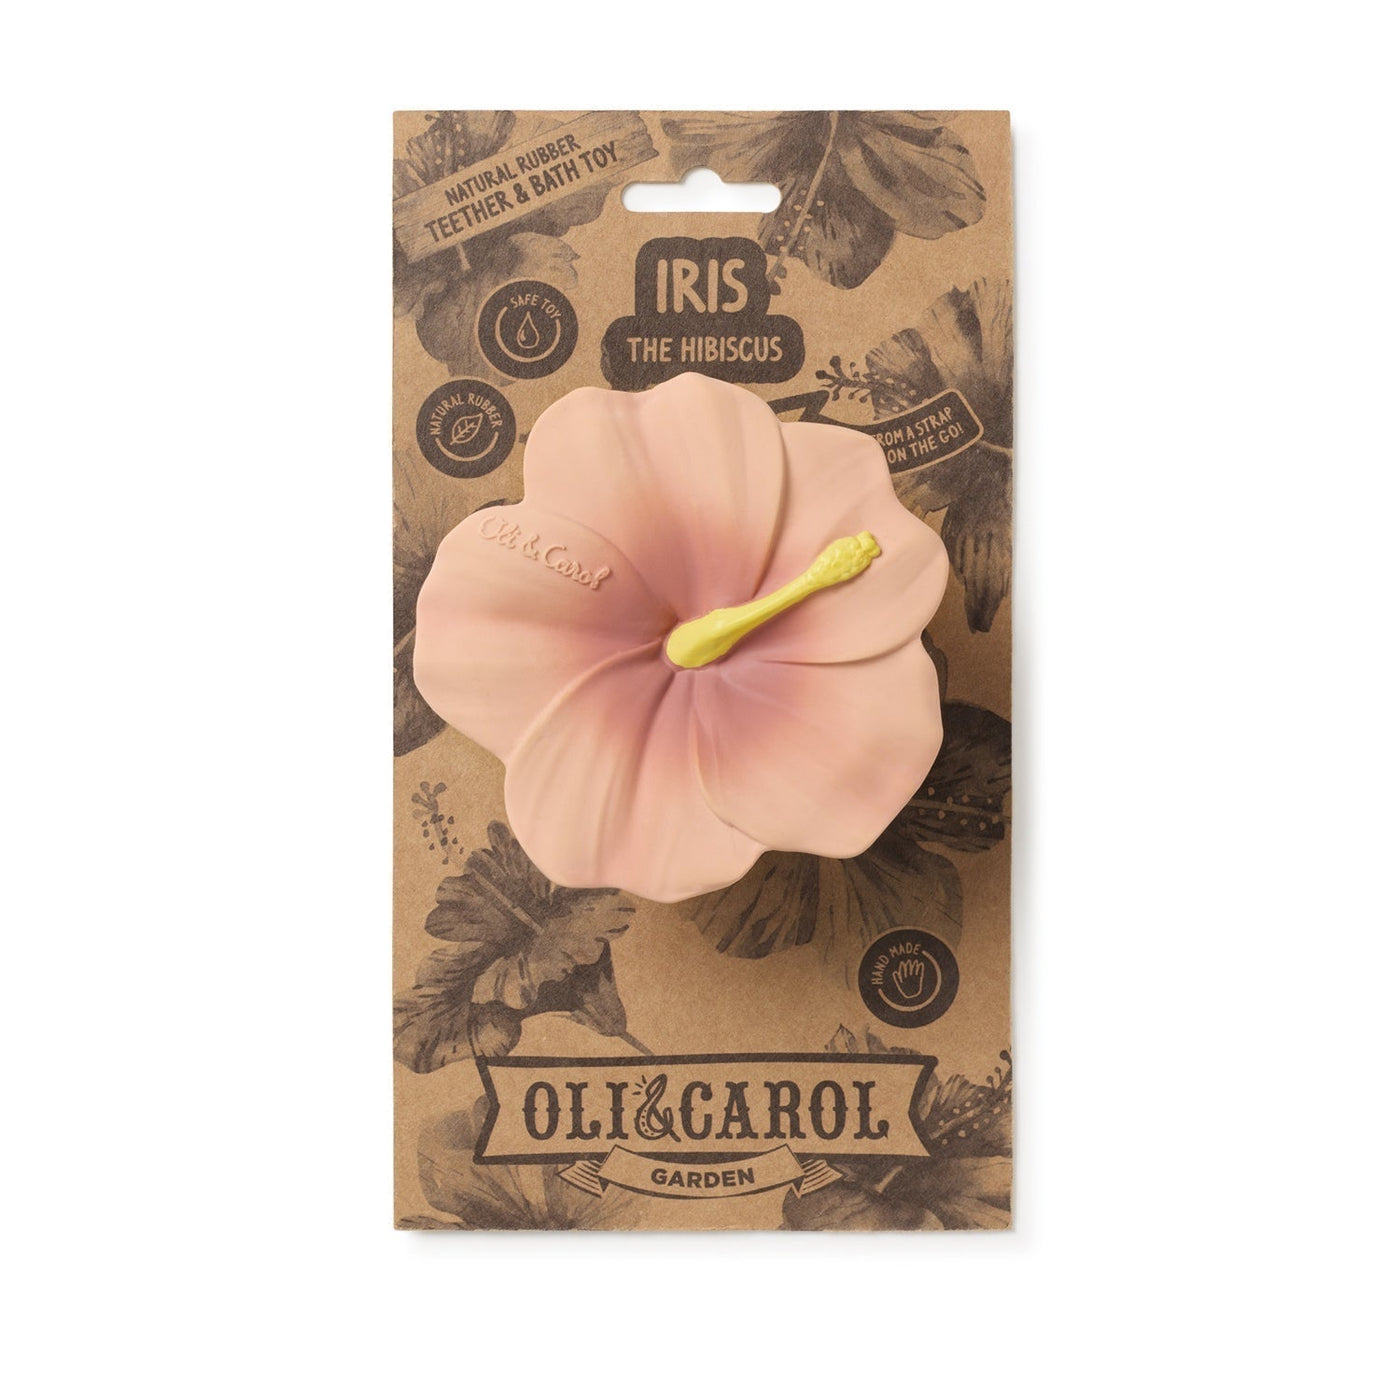 Oli and Carol Iris The Hibiscus-Kids-Ohh! By Gum - Shop Sustainable